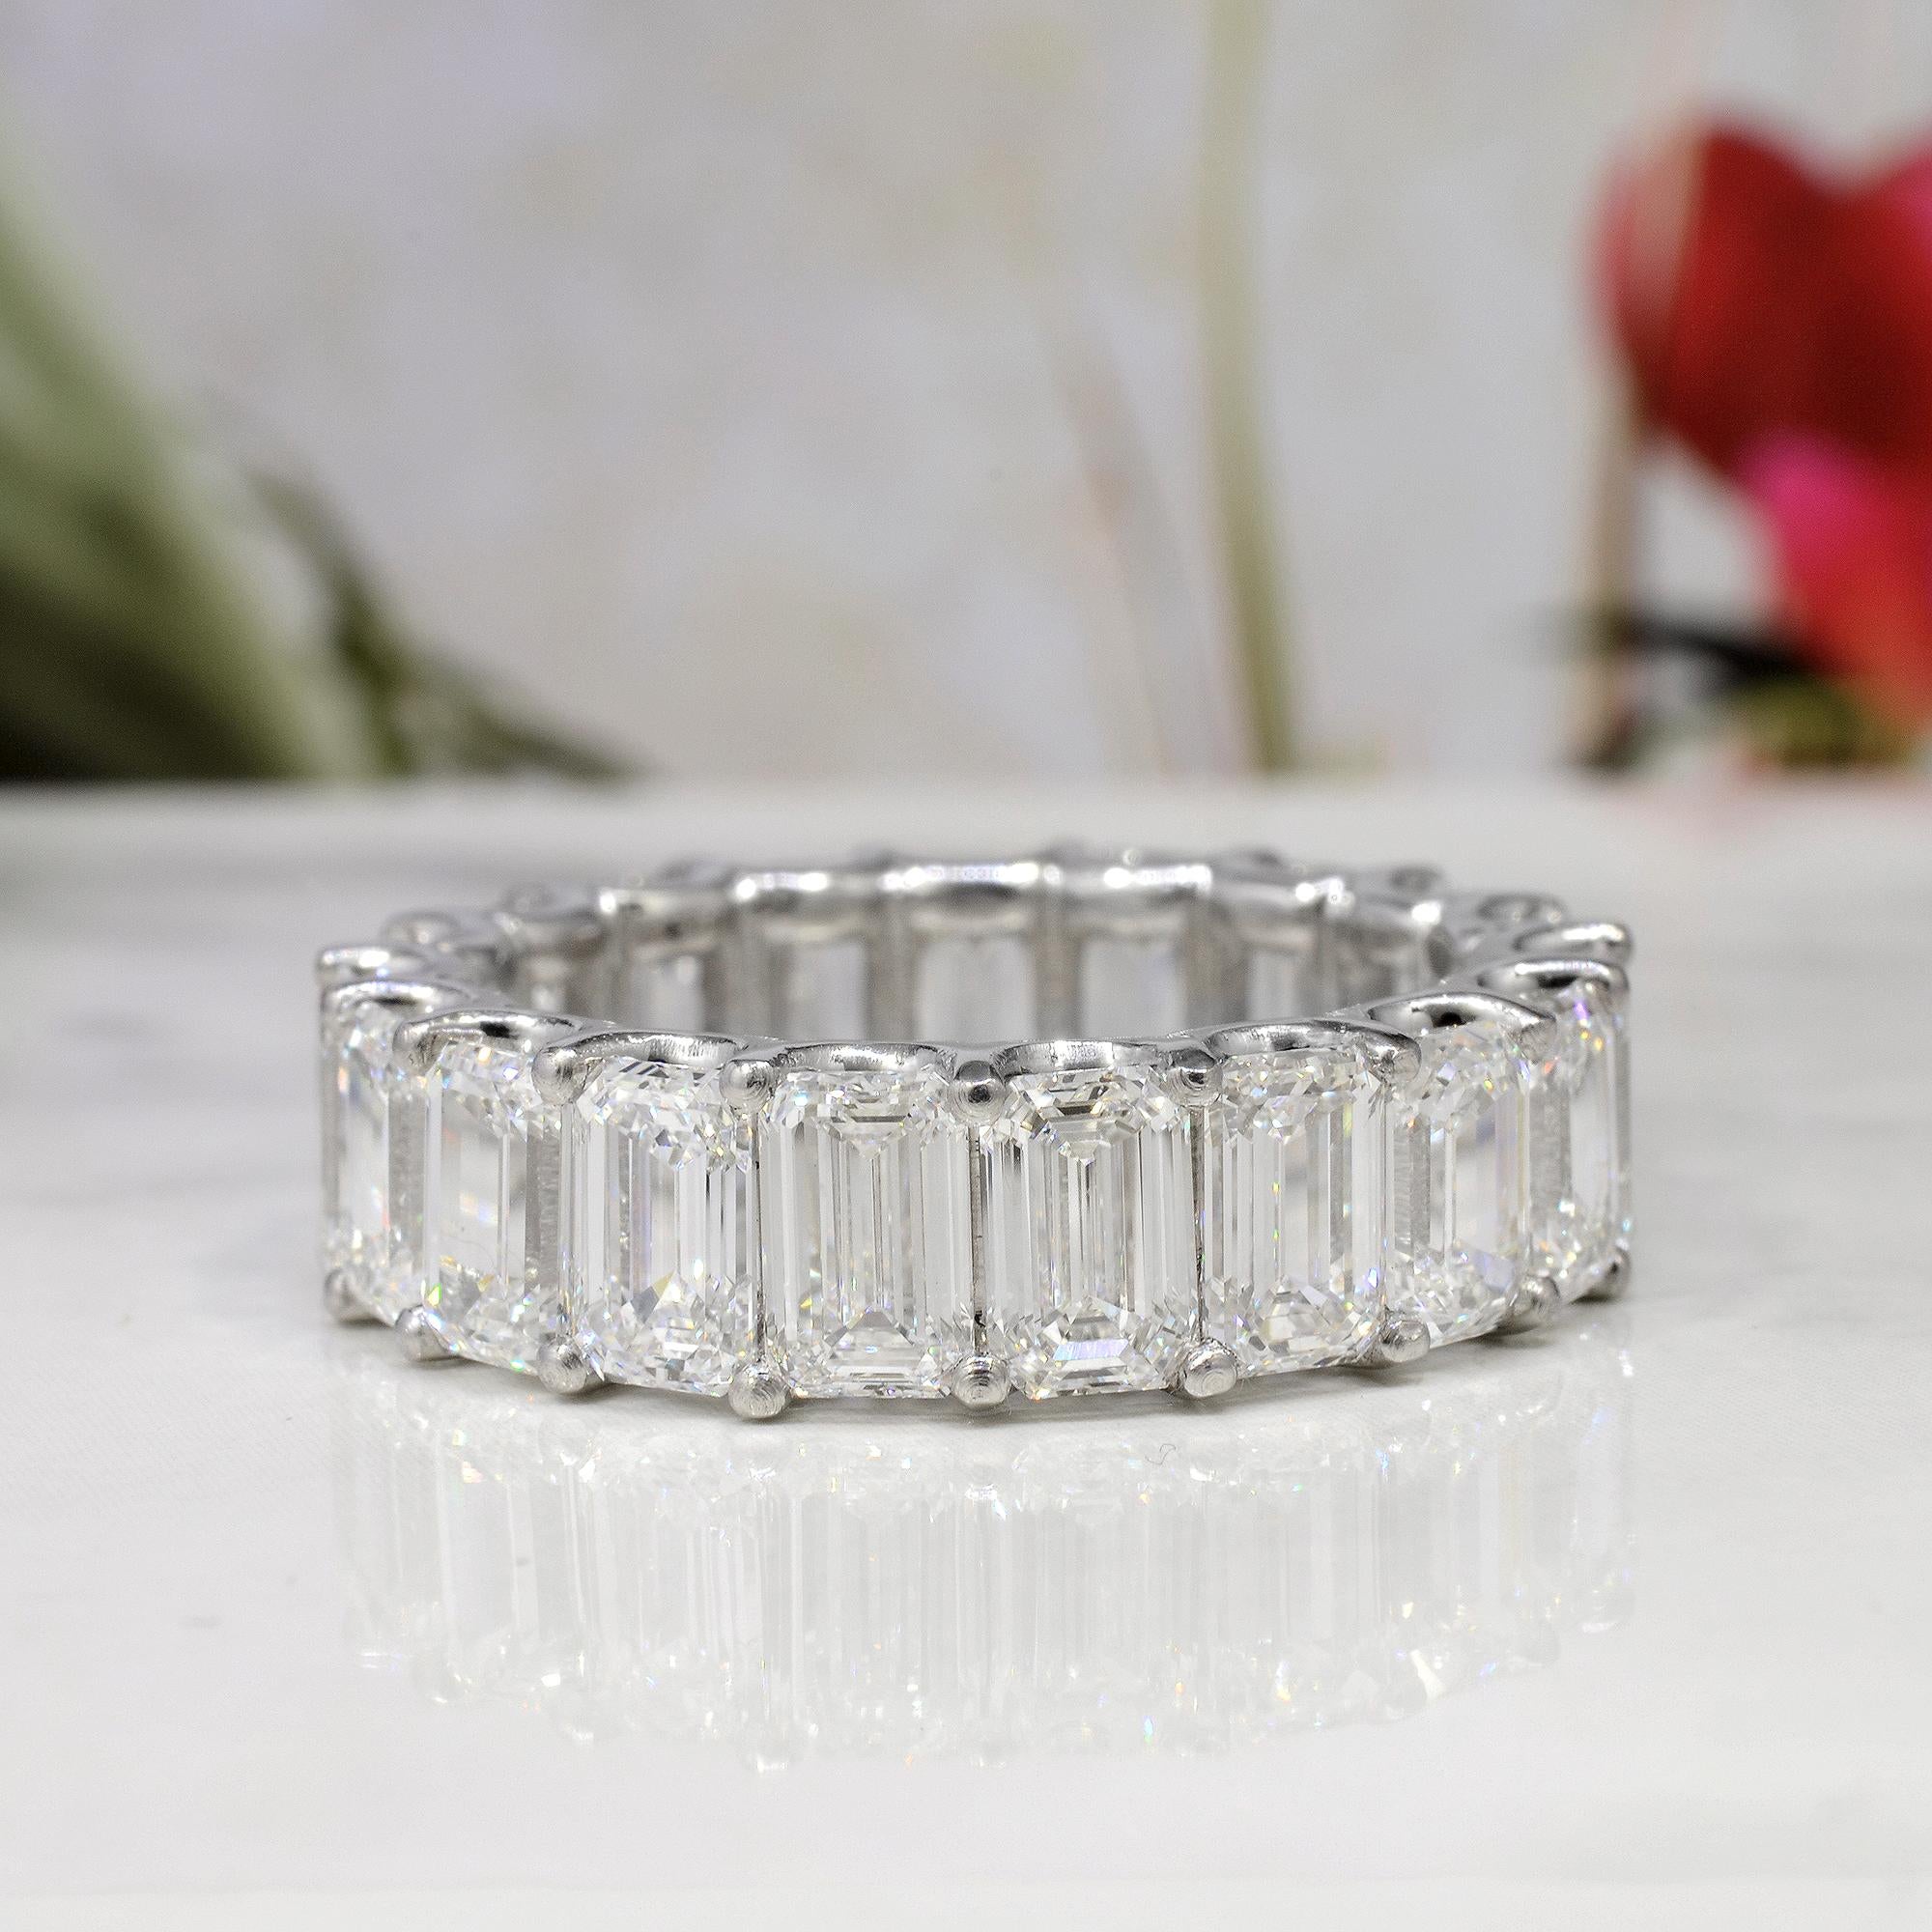 For Sale:  8.00 Ct Emerald Cut Natural Diamond Eternity Band G Color VS1 Clarity Platinum 6